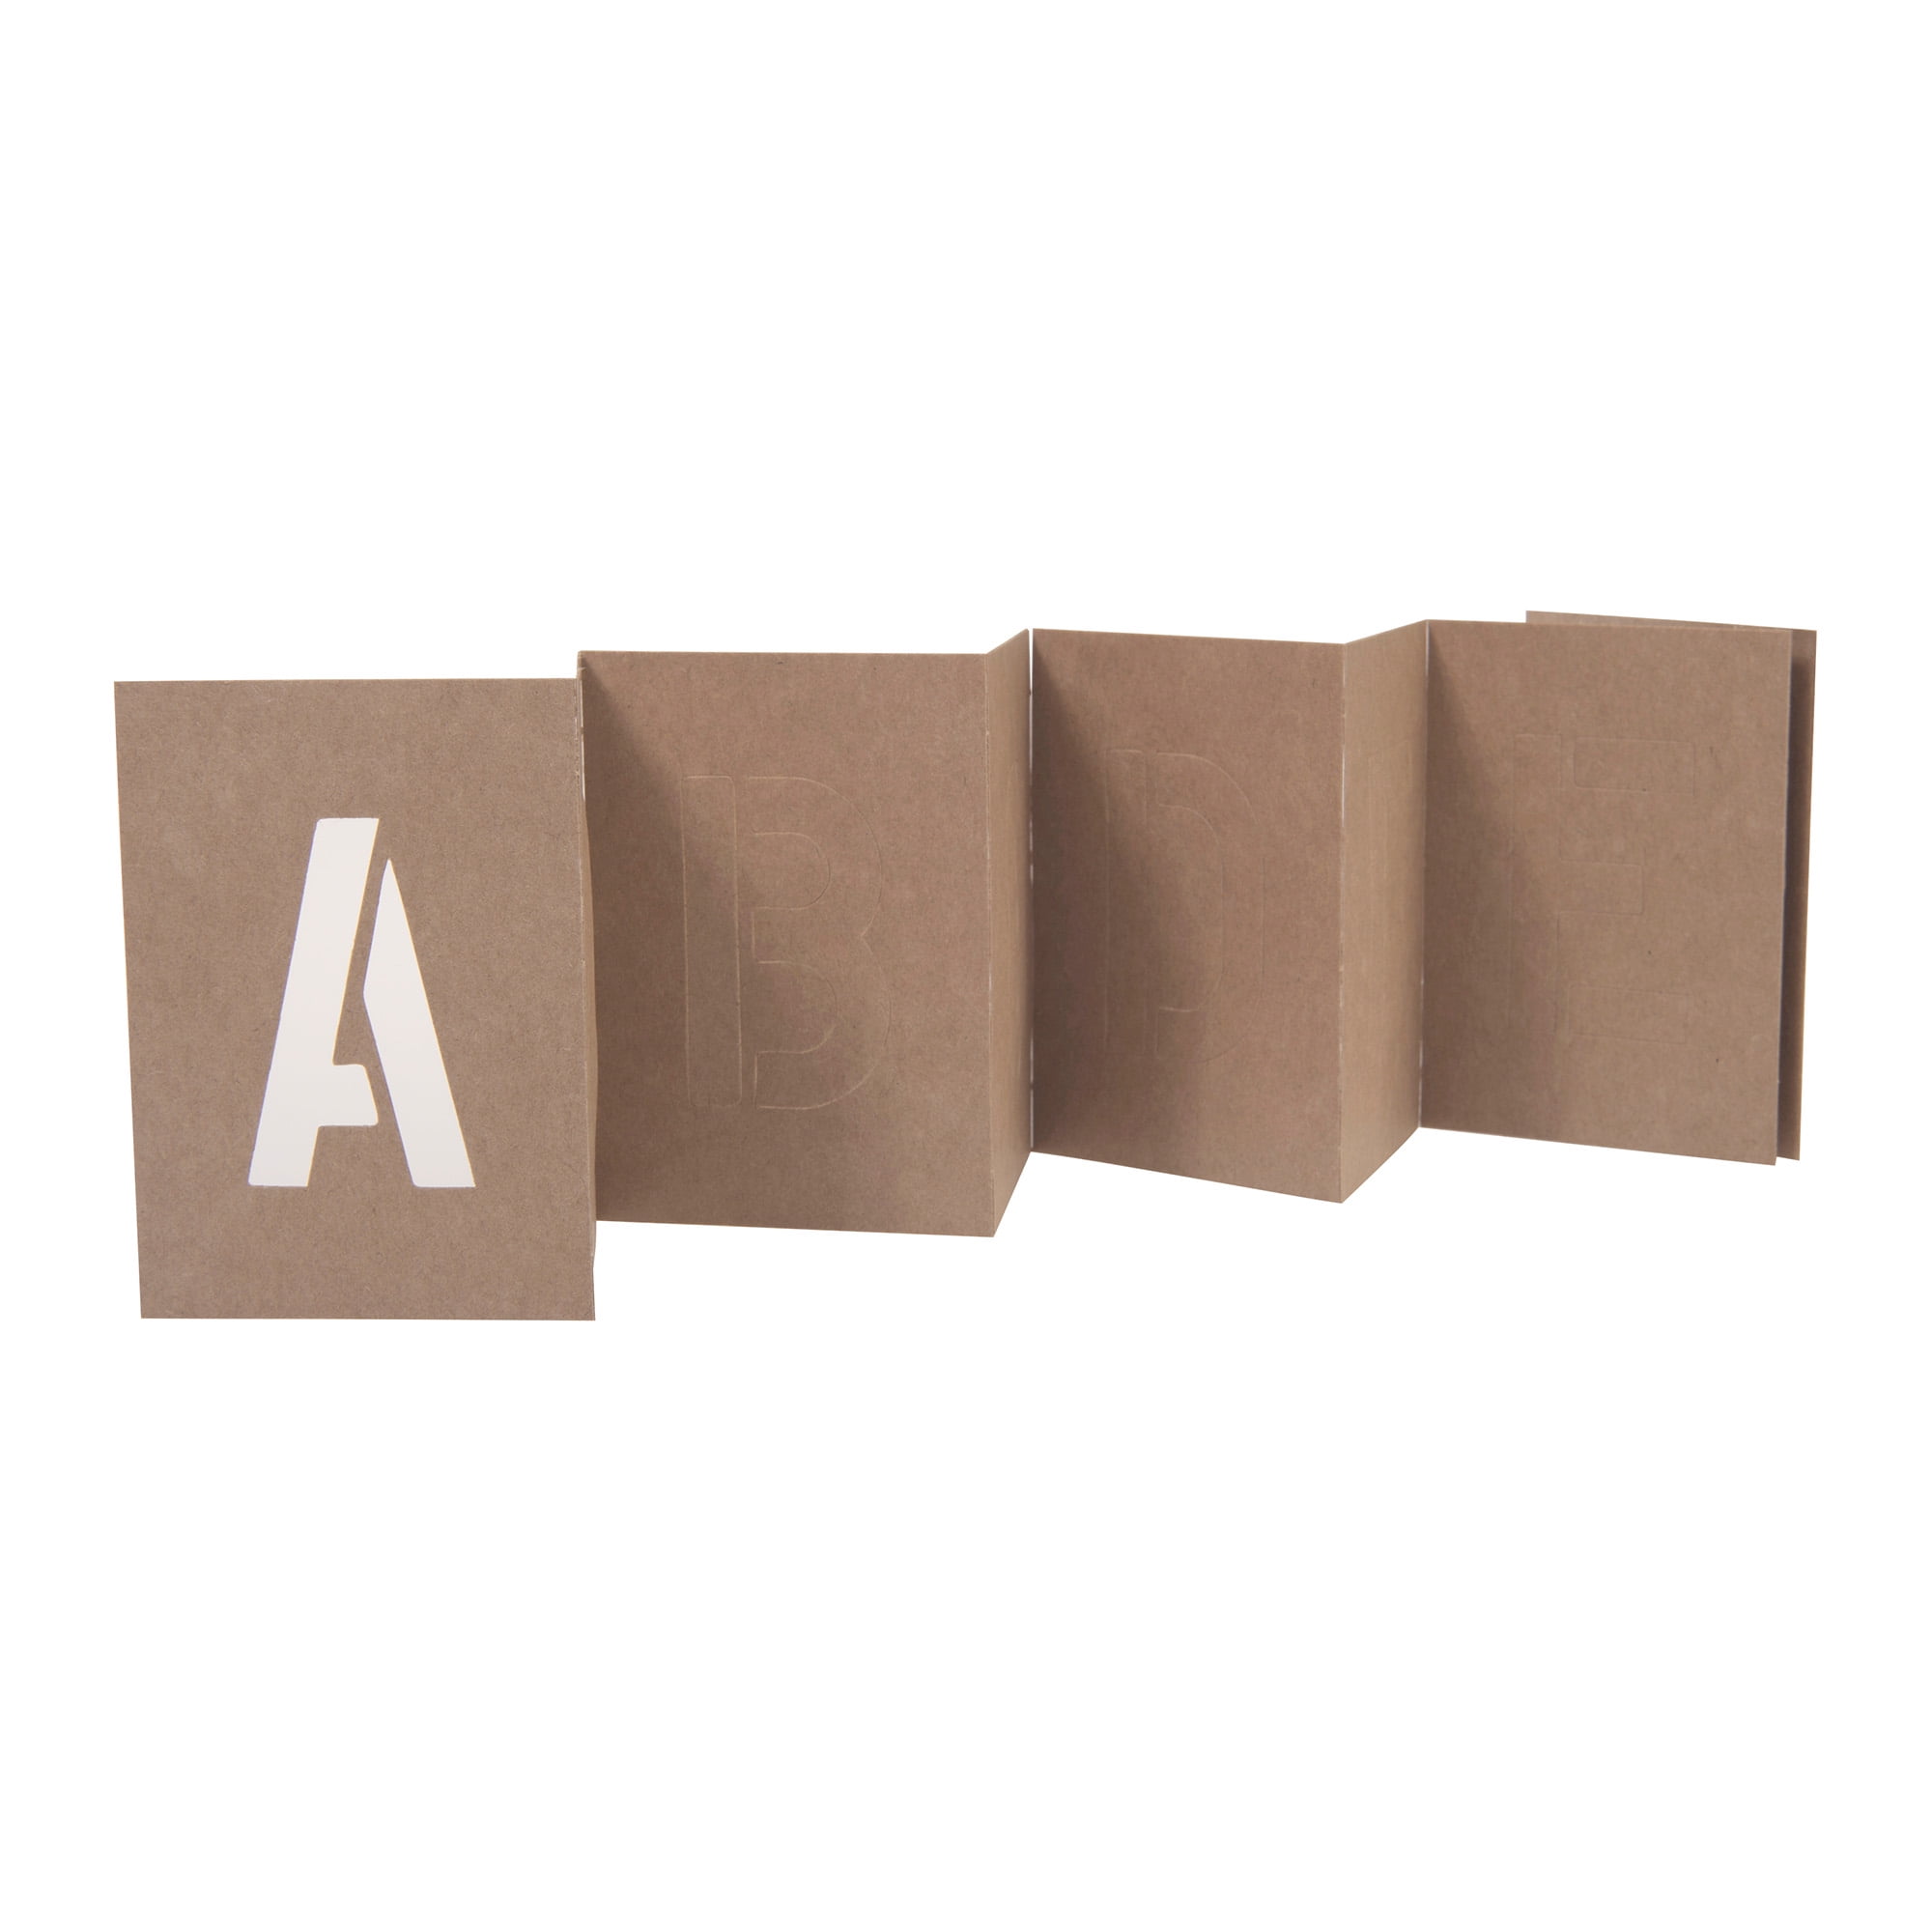 HY-KO Products ST-3 Number & Letter Stencils, 3 INCH, Tan